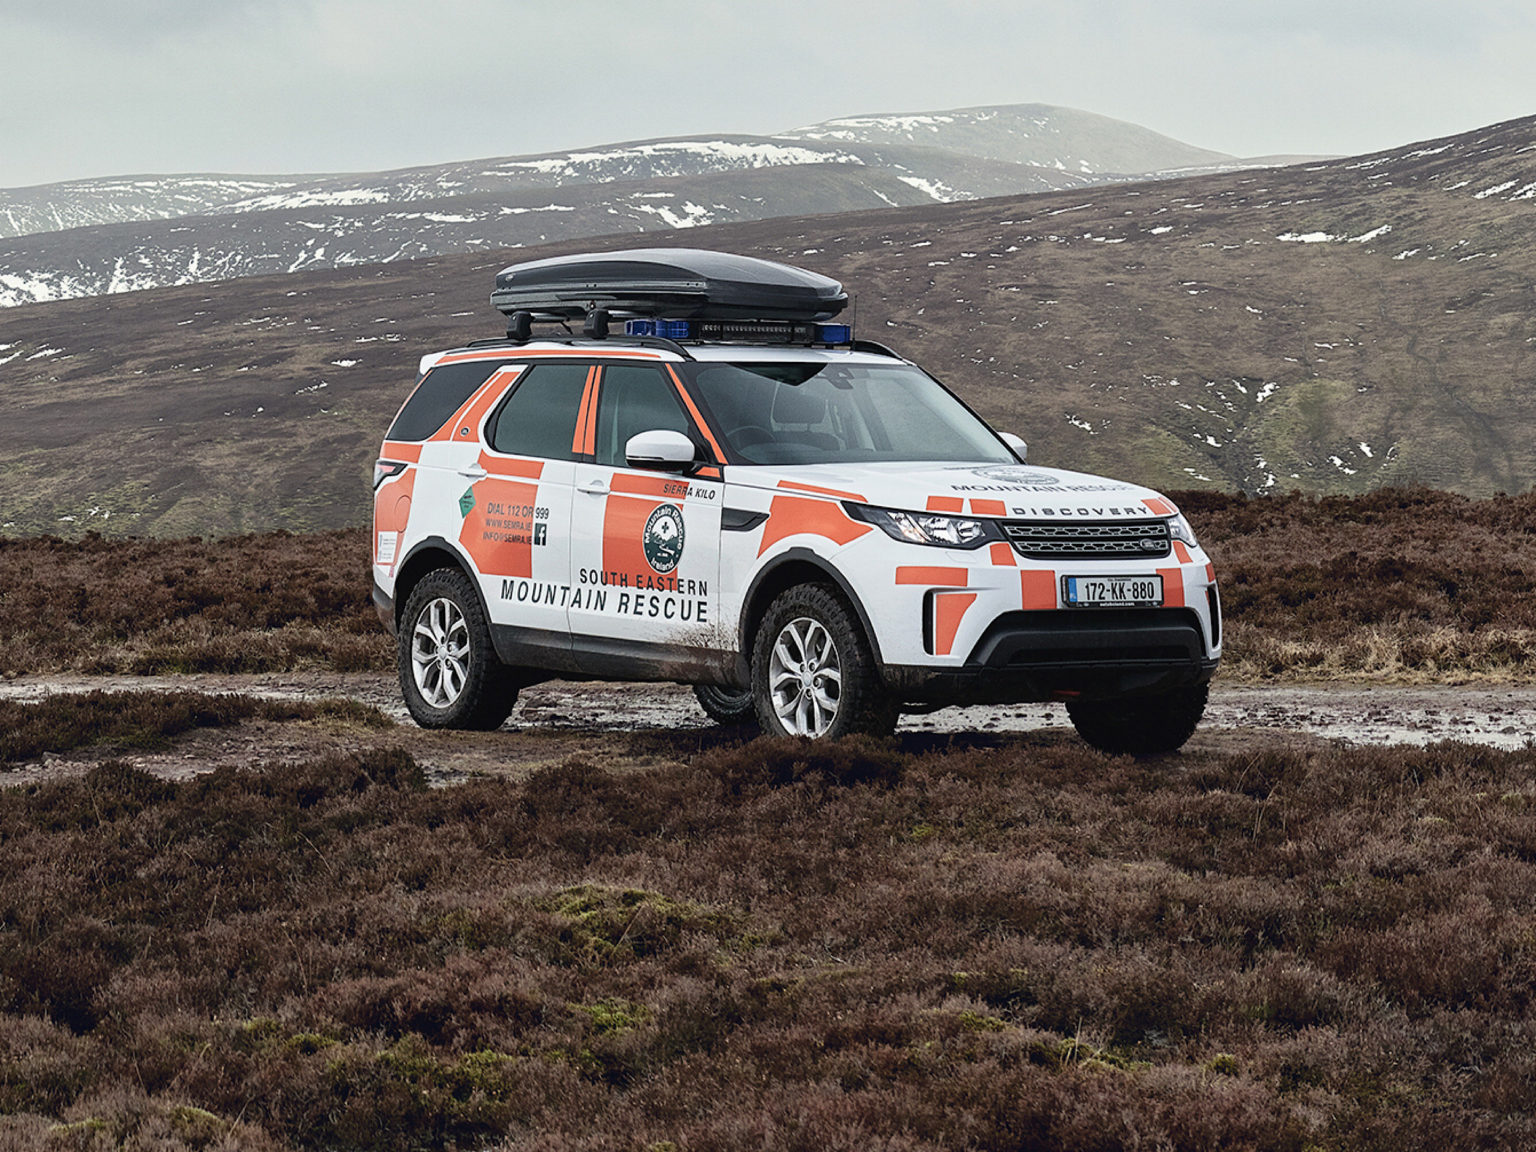 The modded Land Rover will be aiding in mountain rescues in Ireland.